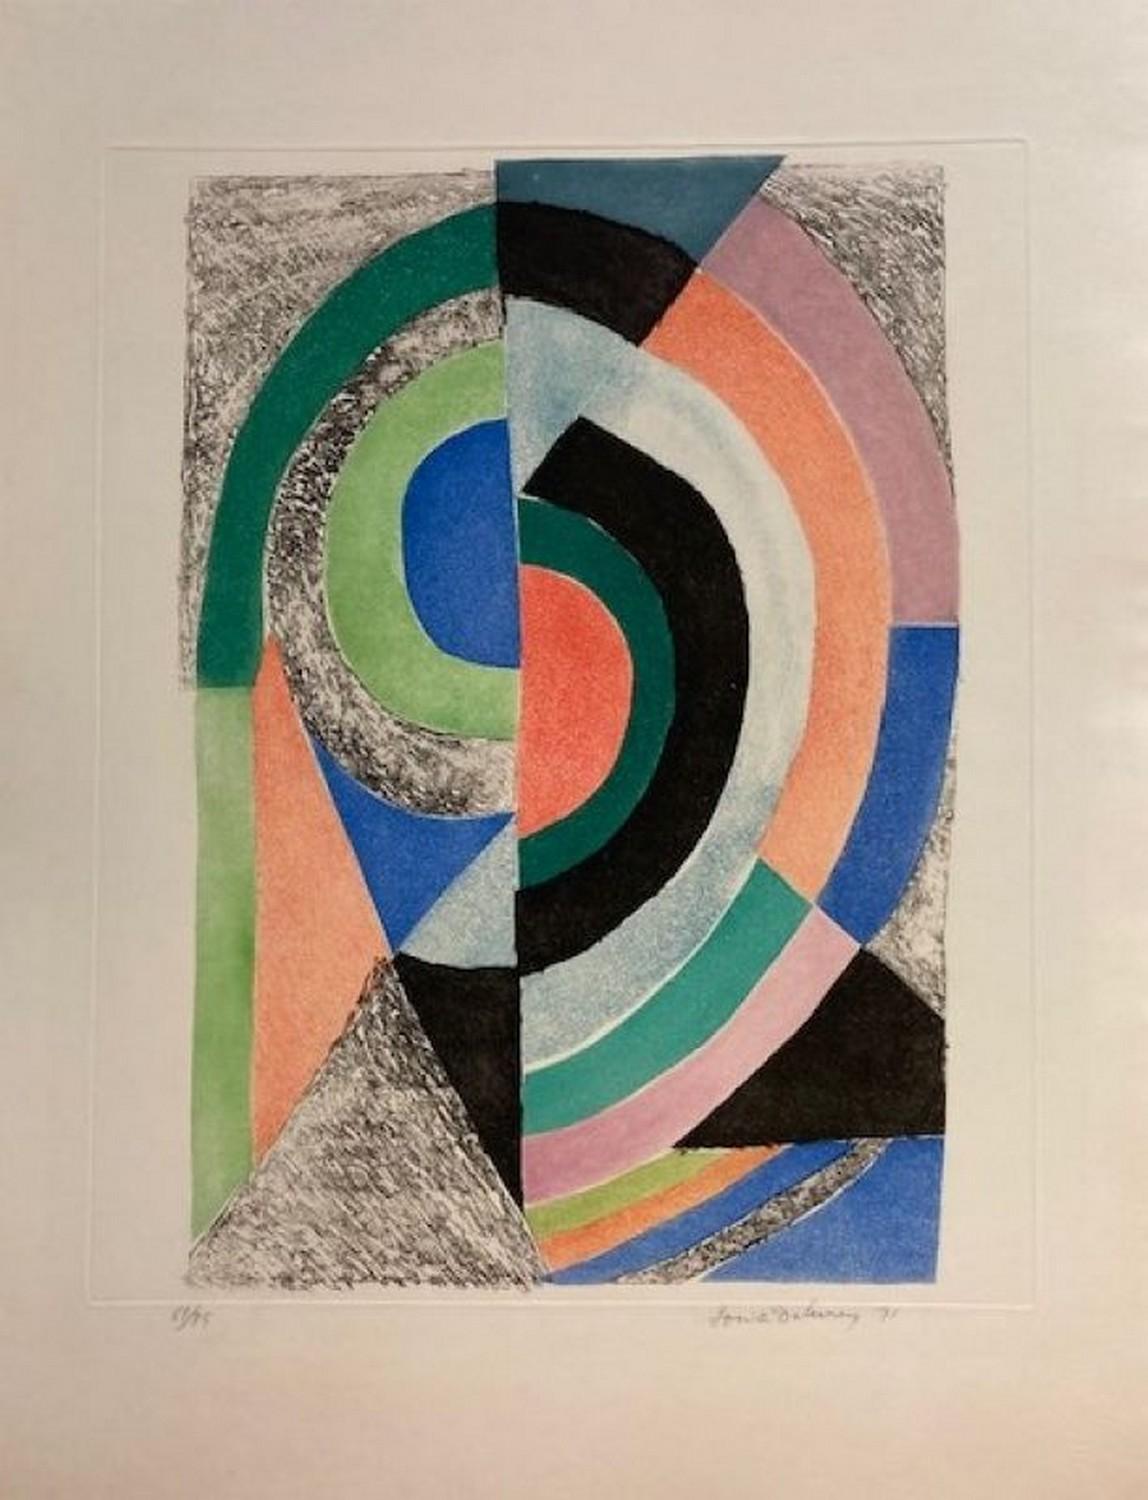 Sonia Delaunay Abstract Print - Demi-cercles 